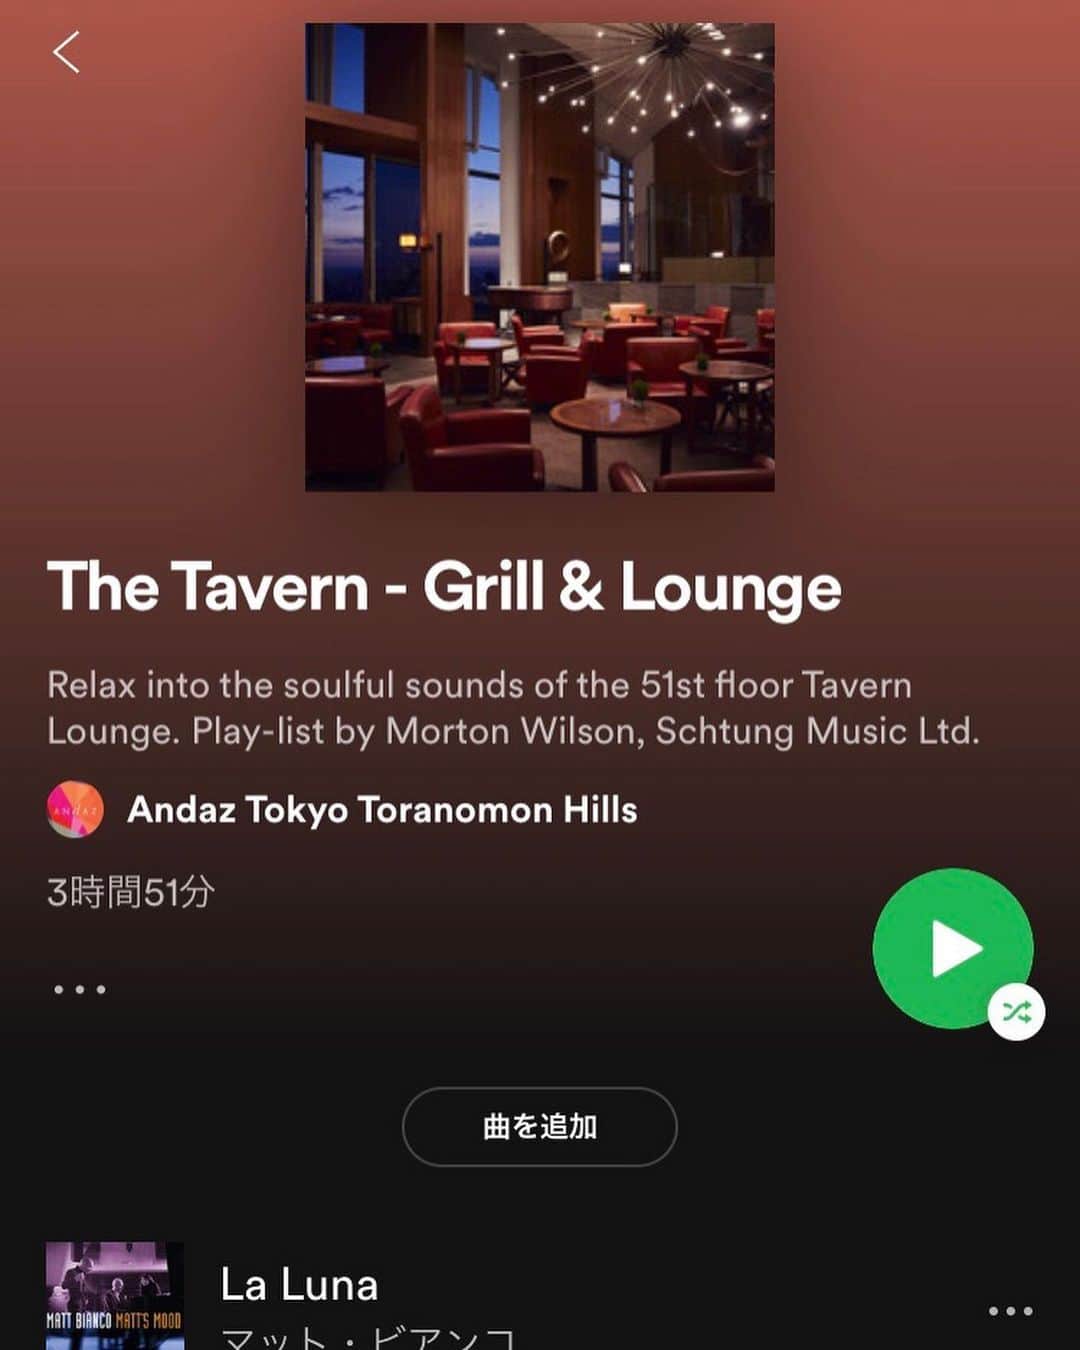 Andaz Tokyo アンダーズ 東京さんのインスタグラム写真 - (Andaz Tokyo アンダーズ 東京Instagram)「Spend the night in at Andaz Tokyo ✨⠀ Transport your next digital gathering to our hotel with the sights, tastes and sounds of The Tavern Lounge. From the comfort of your own home, add a touch of sophistication to your #StayAtHome party with these simple steps:⠀ ⠀ 🖼 Set the stage with a zoom background of our cozy lounge - https://bit.ly/356r2wF⠀ 🍤 Re-create signature tastes at home with easy to follow recipes - https://bit.ly/2VSoeiG⠀ 🎶 Enhance your surroundings with a curated playlist on Spotify - https://spoti.fi/3bIz9lW⠀ ⠀ Swipe and check our stories to see more, and tag us at #AndazHomeParty to share 😊⠀ ⠀ アンダーズ 東京でお食事をしているような気分を味わえるオンラインツールをご用意しました。以下の3ステップ でご自宅がザ タヴァン ラウンジに早変わり。ぜひおためしください。⠀ ⠀ 🖼 オンライン会議ツールの背景を店内の壁紙に変更 - https://bit.ly/356r2wF⠀ 🍹 おうちでも簡単にできるカクテルとアペタイザーレシピで味を再現 - https://bit.ly/2VSoeiG⠀ 🎵 ザ タヴァン ラウンジのBGMを集めたSpotifyのプレイリストを再生 - https://spoti.fi/3bIz9lW⠀ ⠀ 詳細はスワイプしてストーリーをチェック☝️#AndazHomeParty でぜひ皆さまの様子をシェアしてください😉⠀ ⠀ #andaztokyo #andazhomeparty #うちで過ごそう⠀」4月25日 18時41分 - andaztokyo